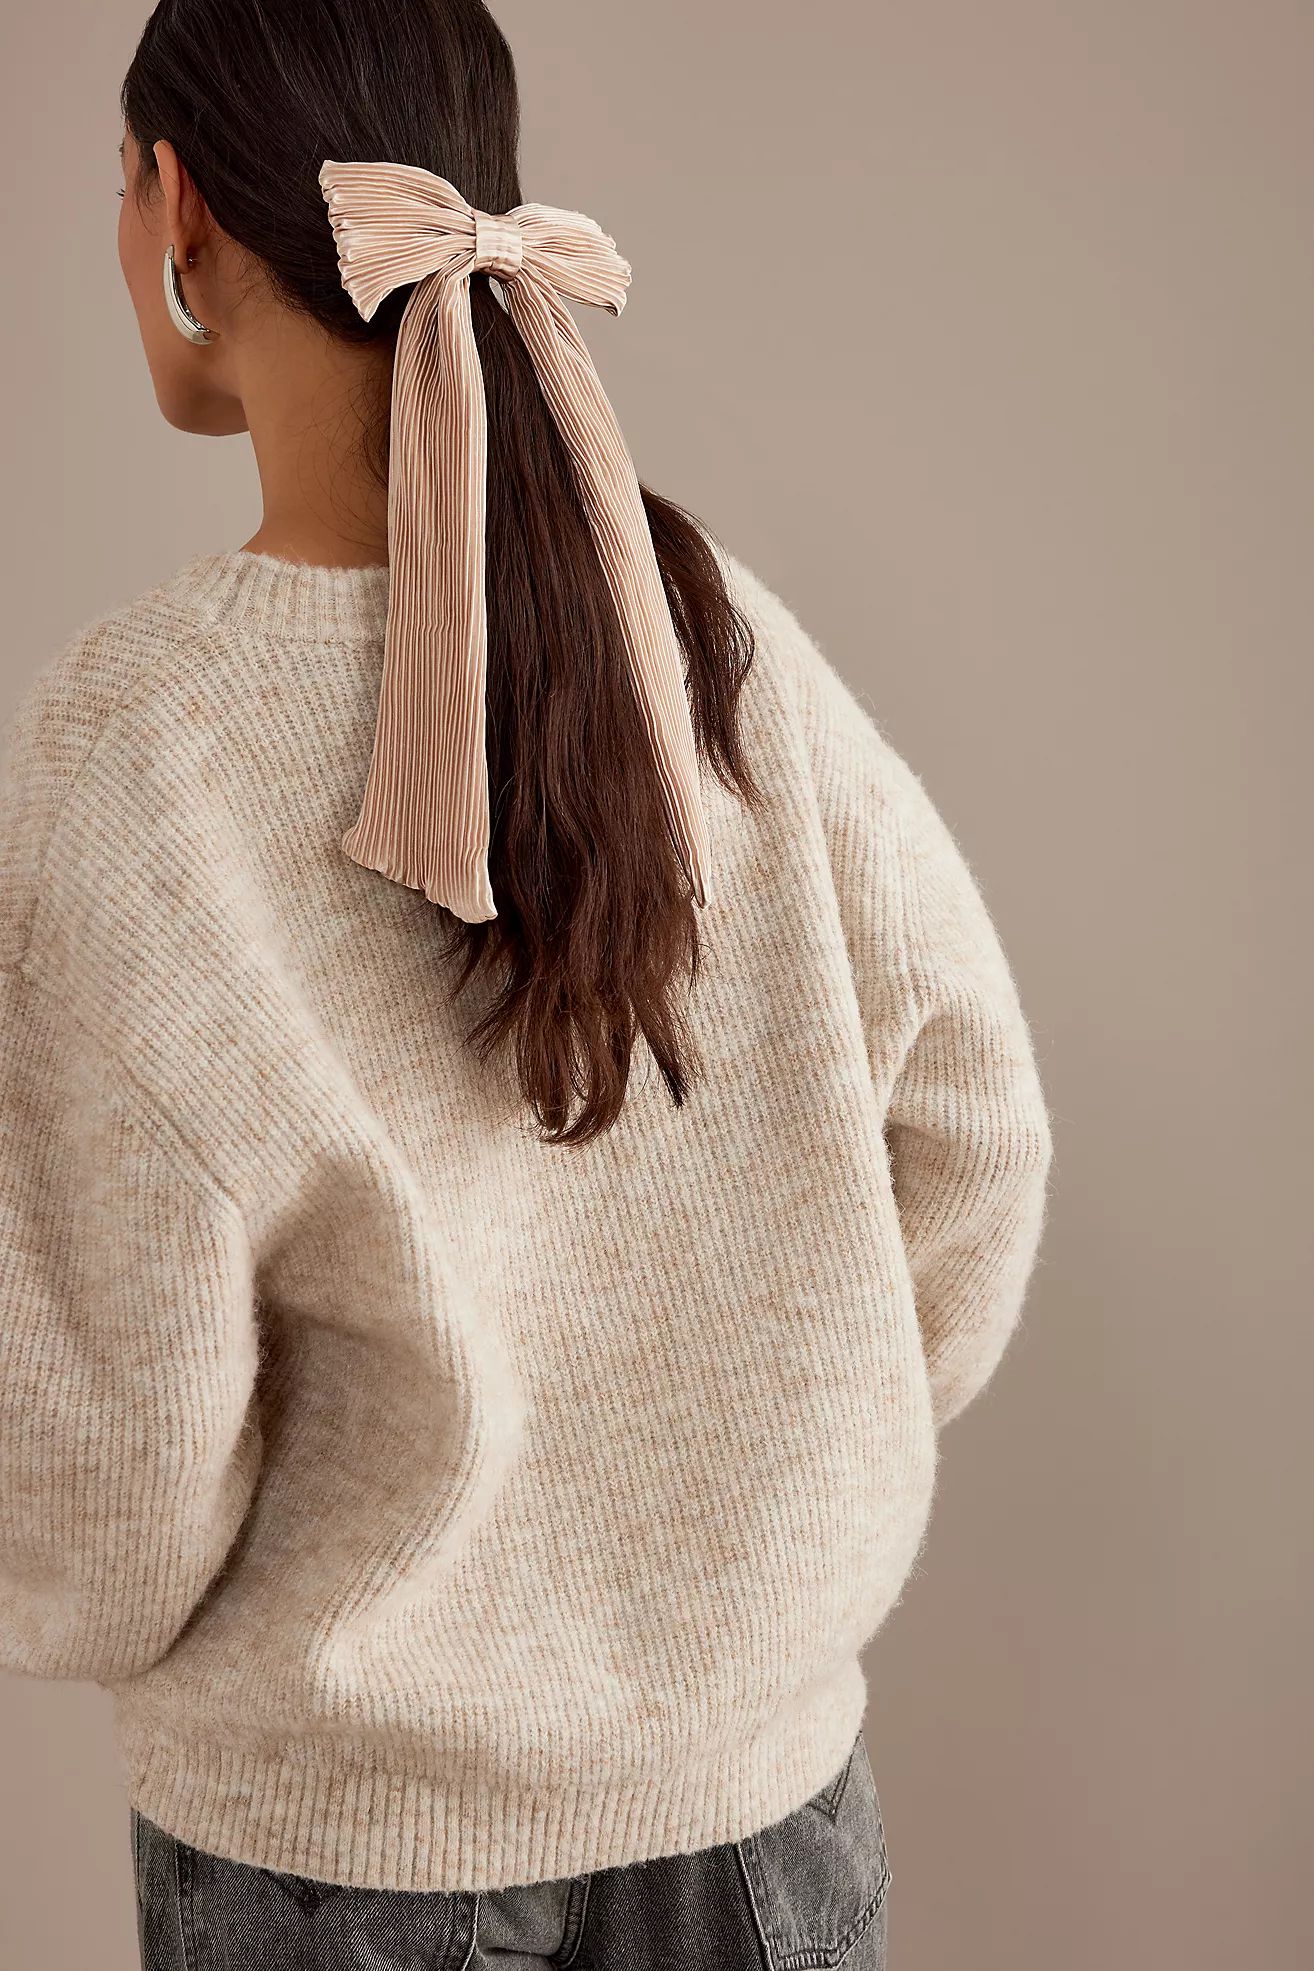 Pleated Bow Barrette Hair Clip | Anthropologie (UK)